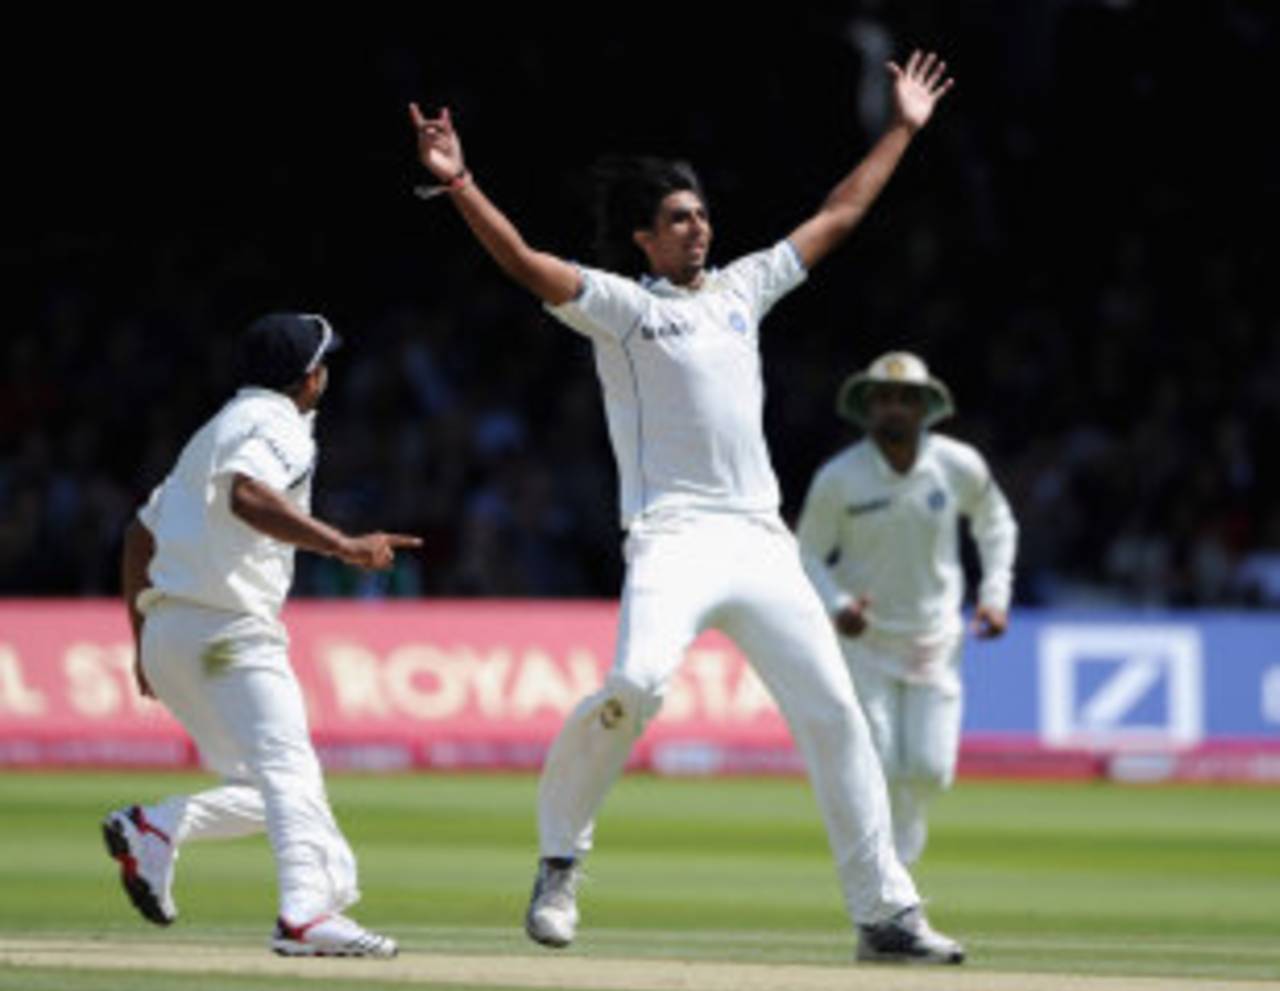 Ishant Sharma is pumped up after claiming Ian Bell for a duck, England v India, 1st Test, Lord's, 4th day, July 24, 2011